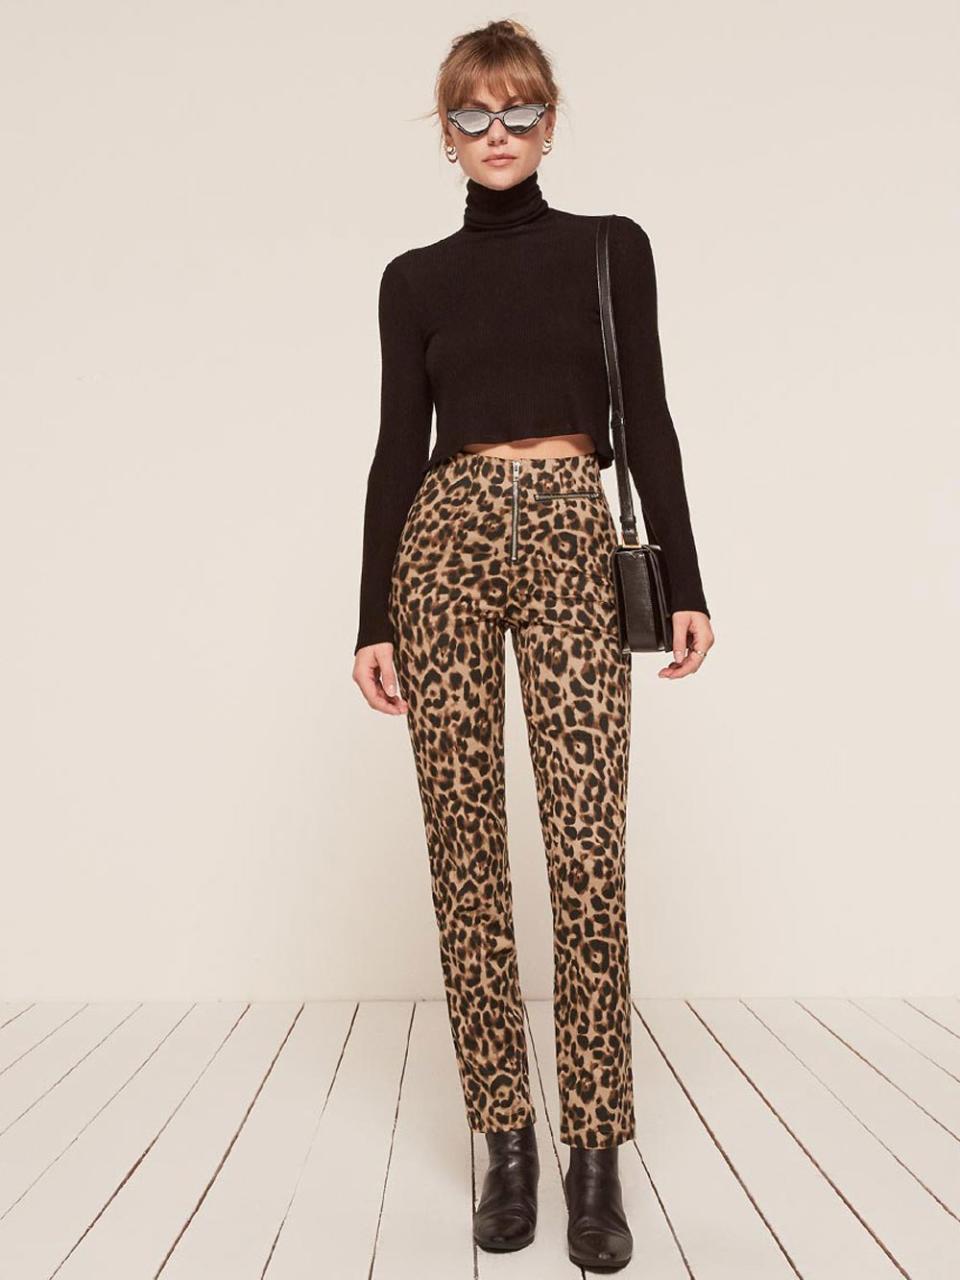 Fresh Ways to Wear Leopard Print This Fall: Pants